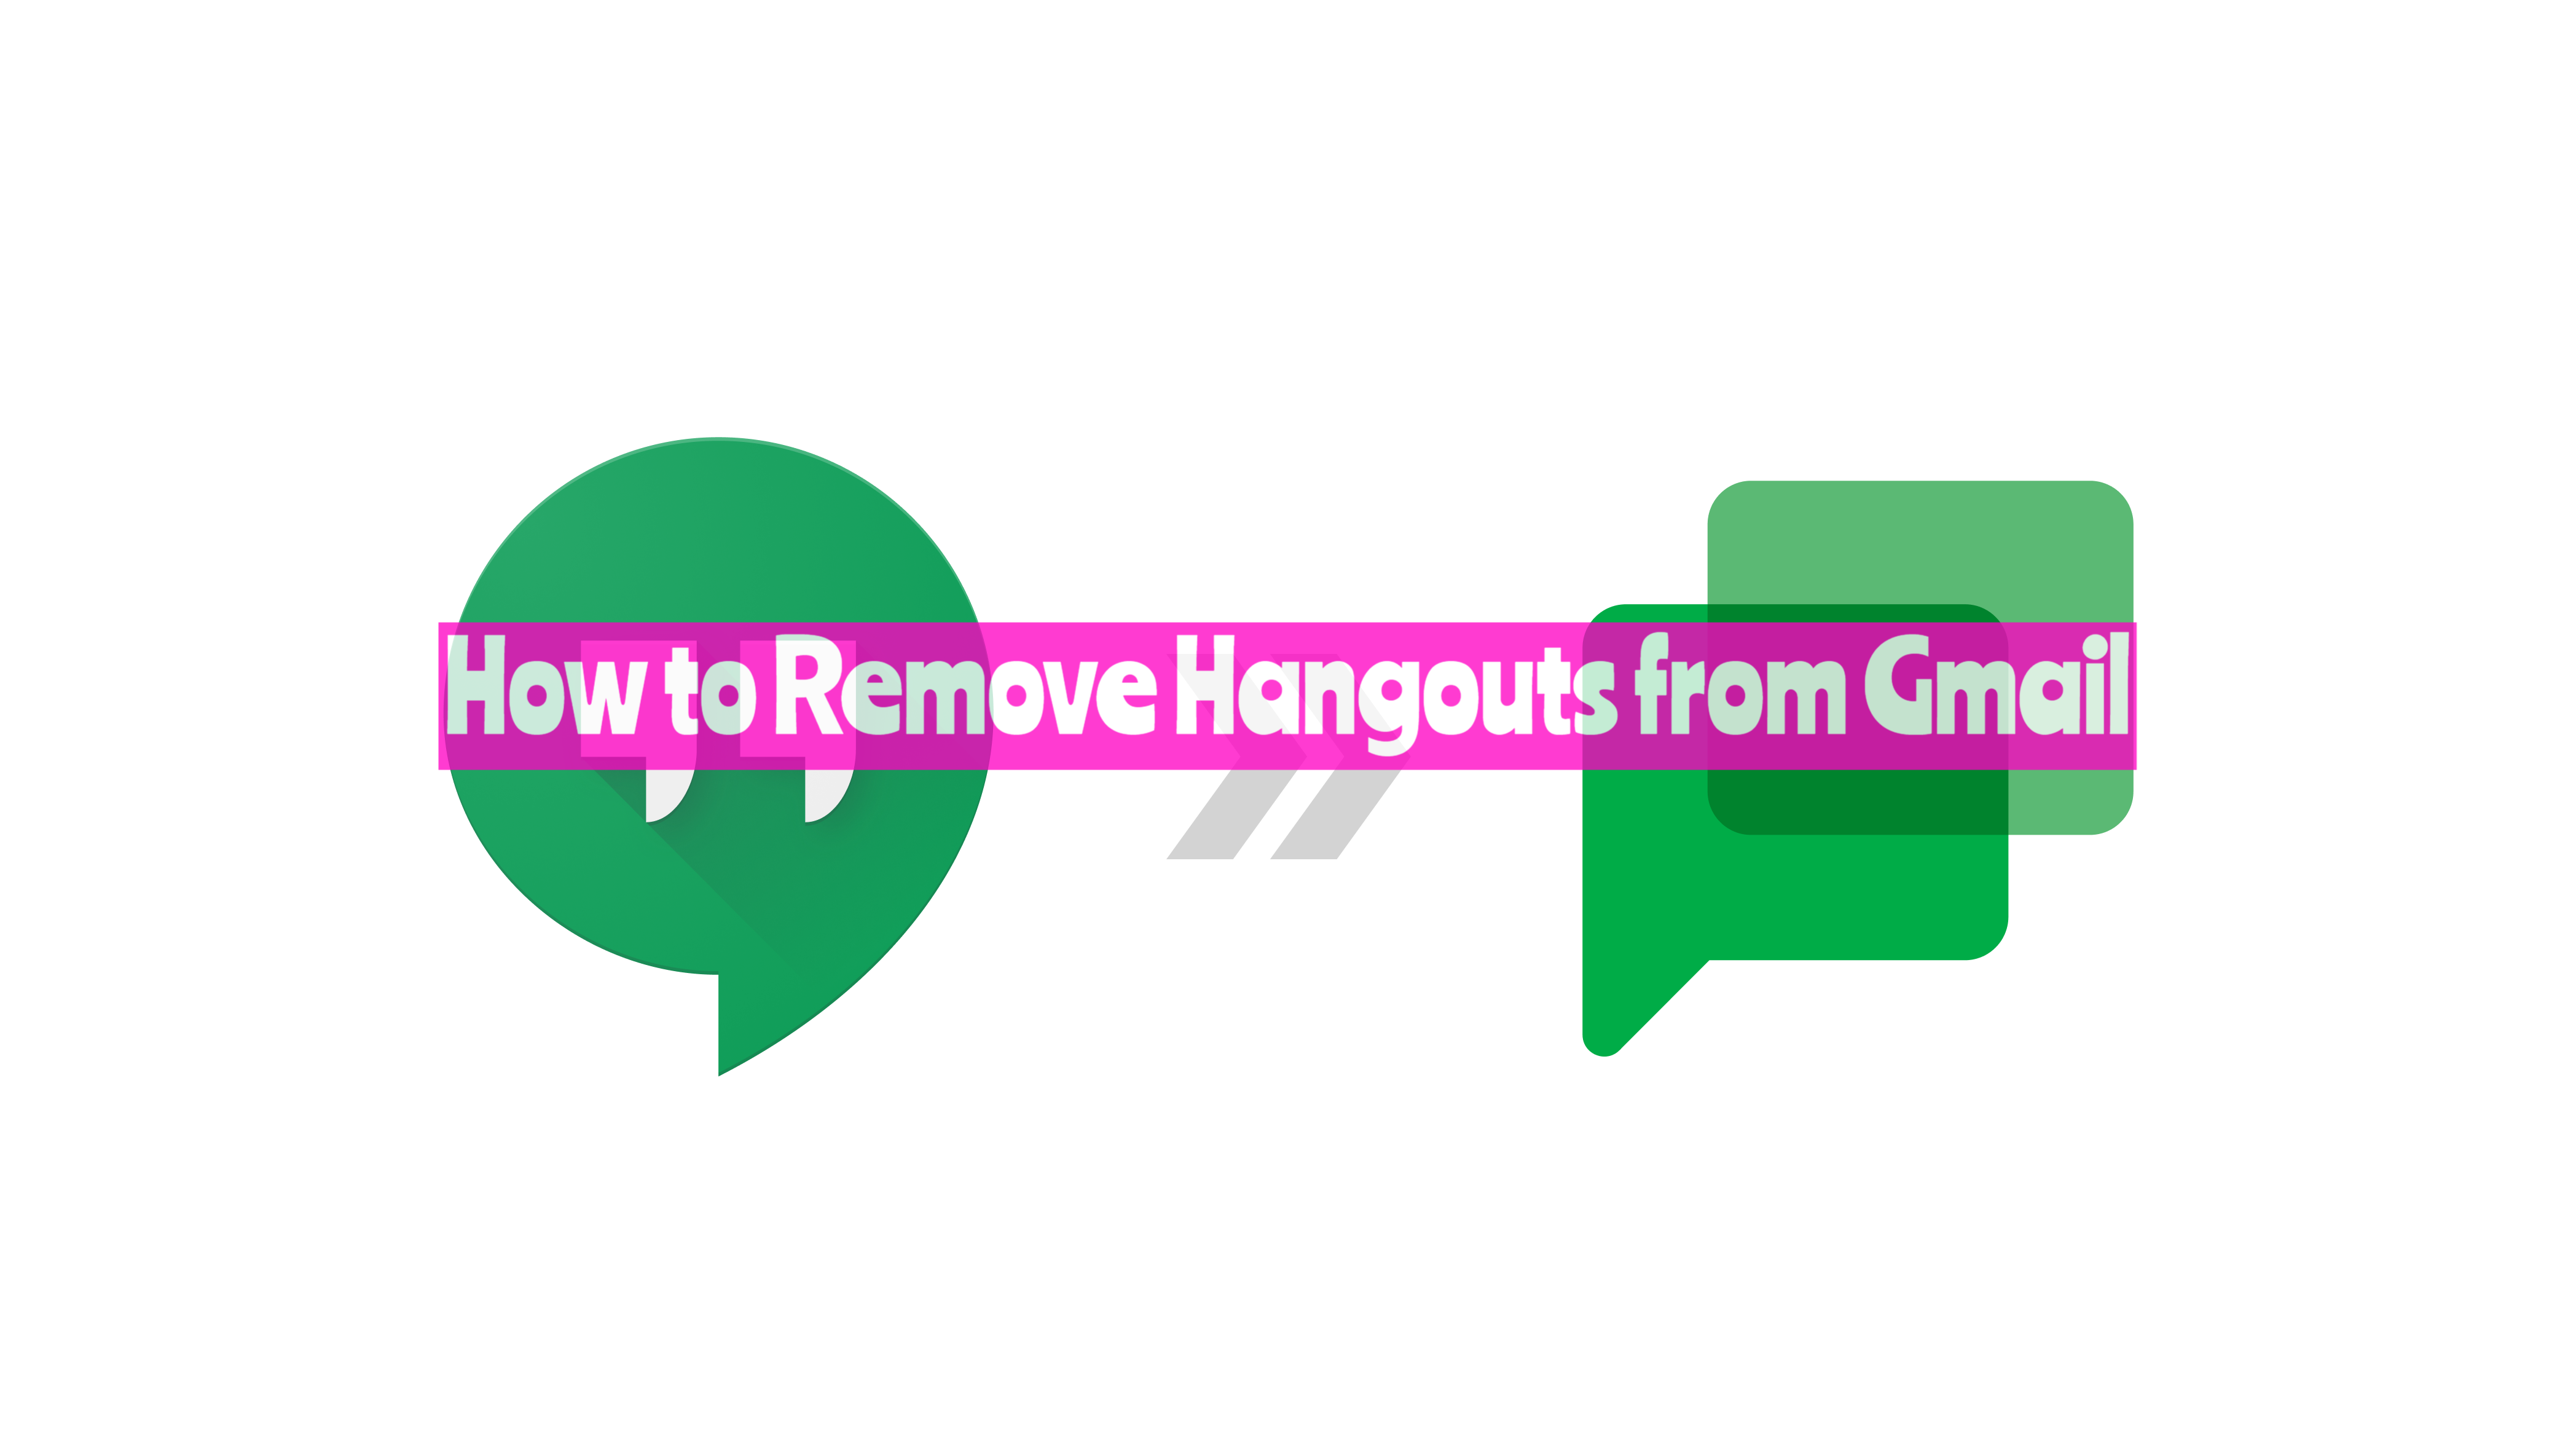 How to Remove Hangouts from Gmail